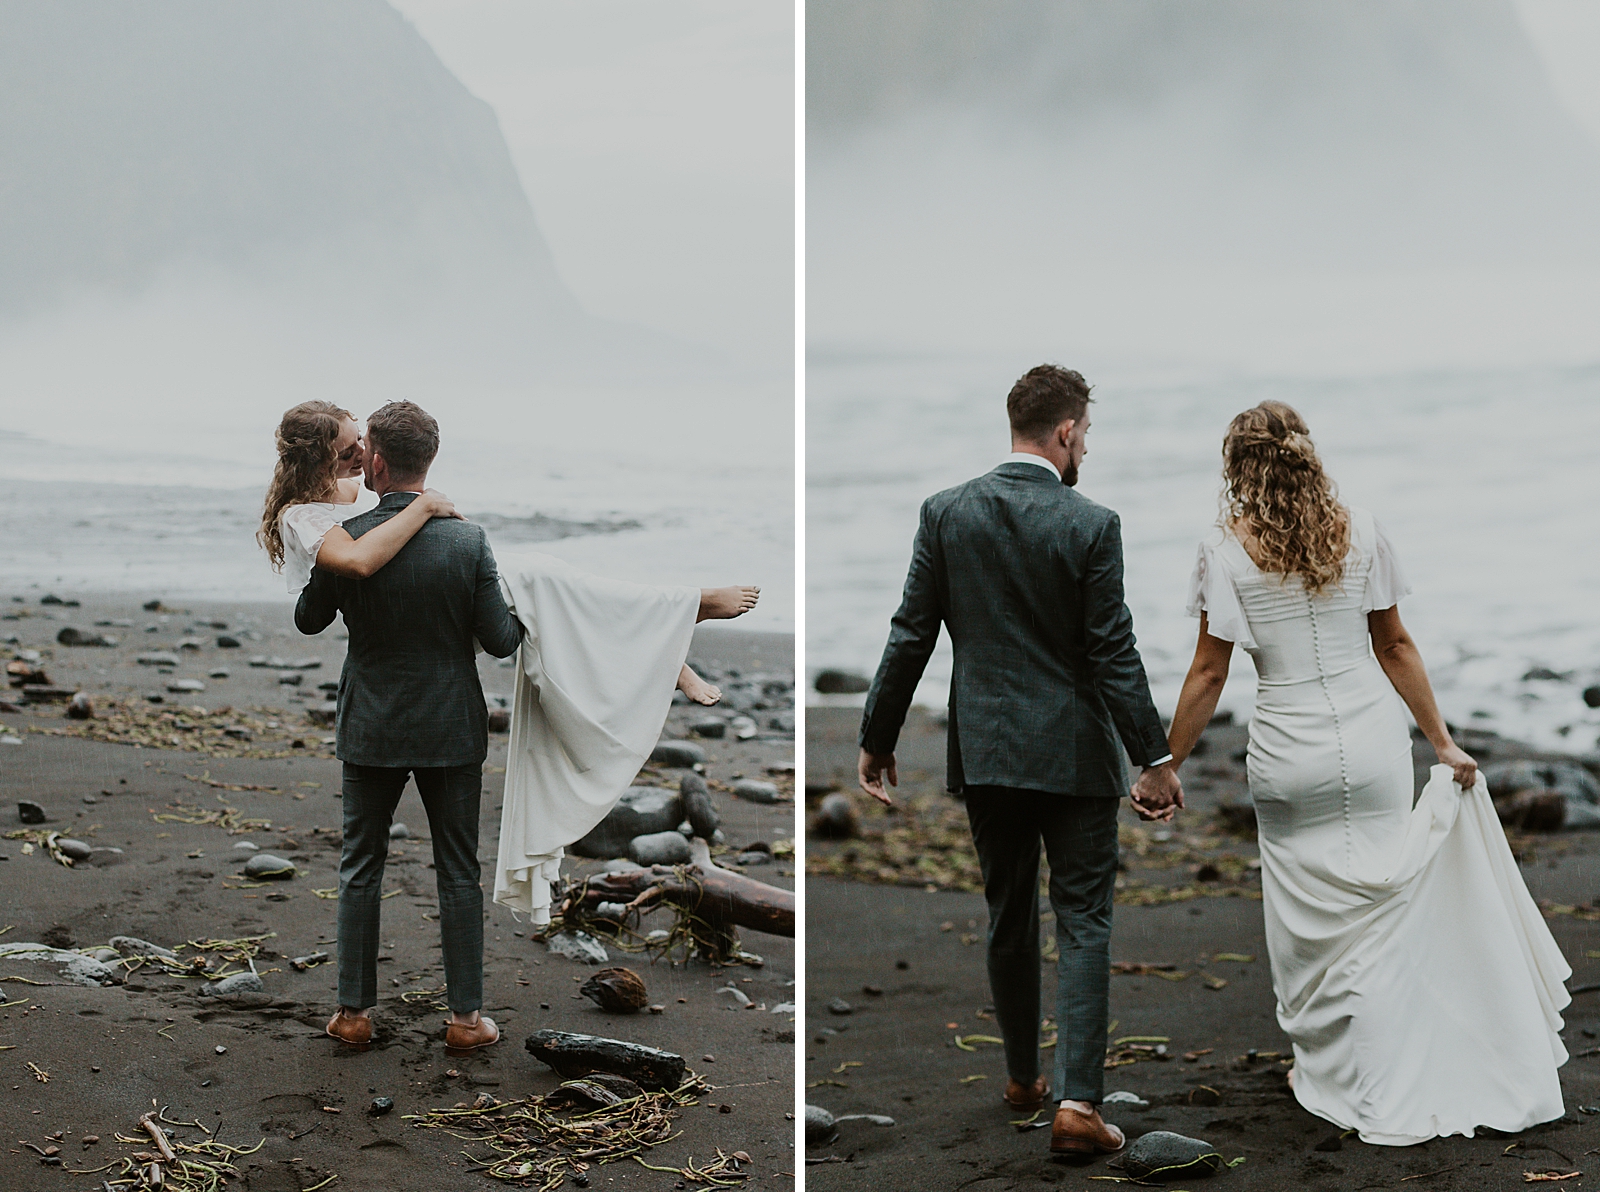 Groom holding Bride and kissing her outside by the water